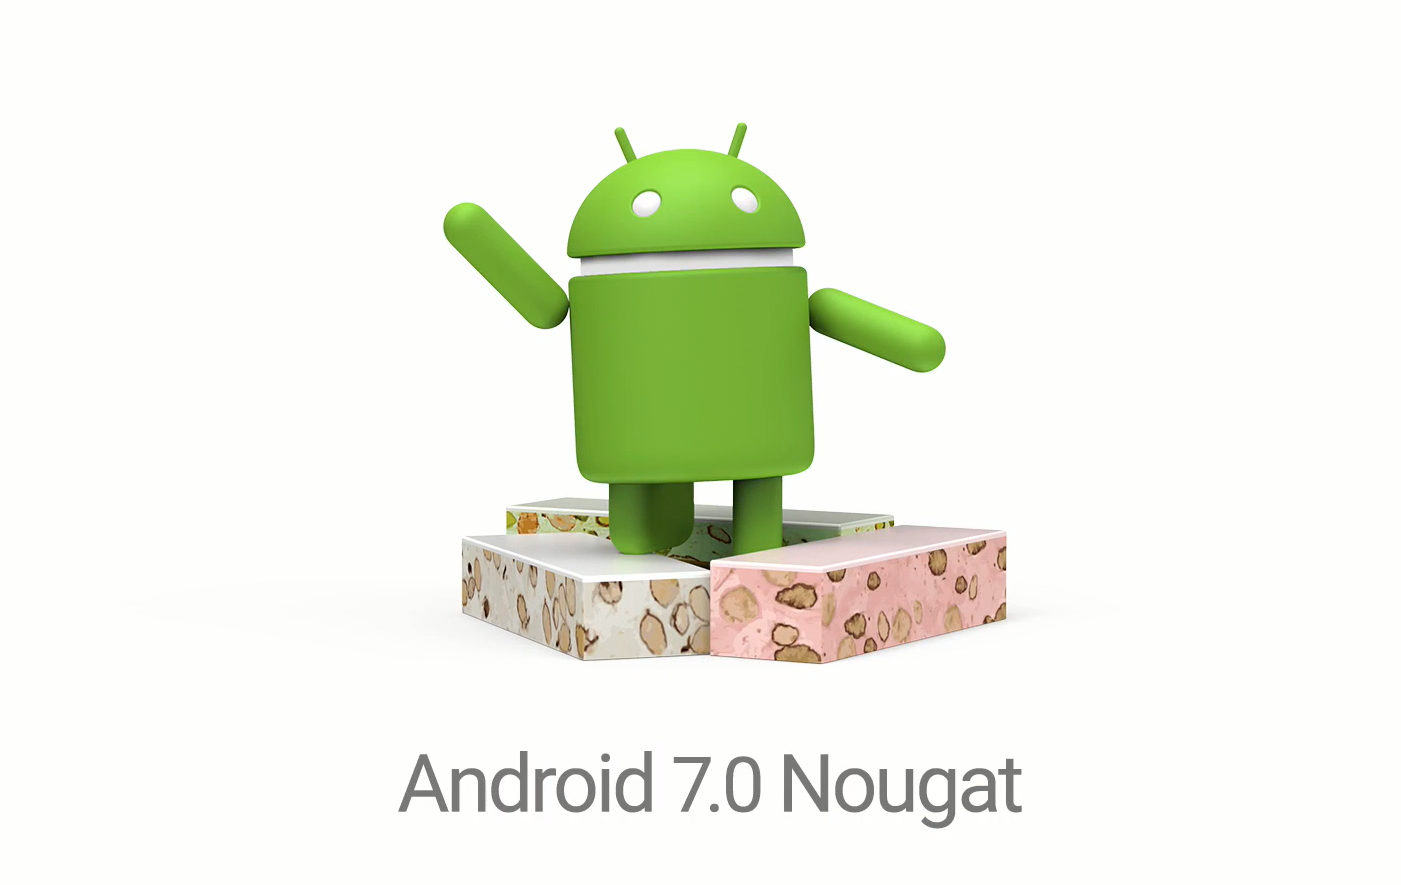 Android N Becomes Android Nougat